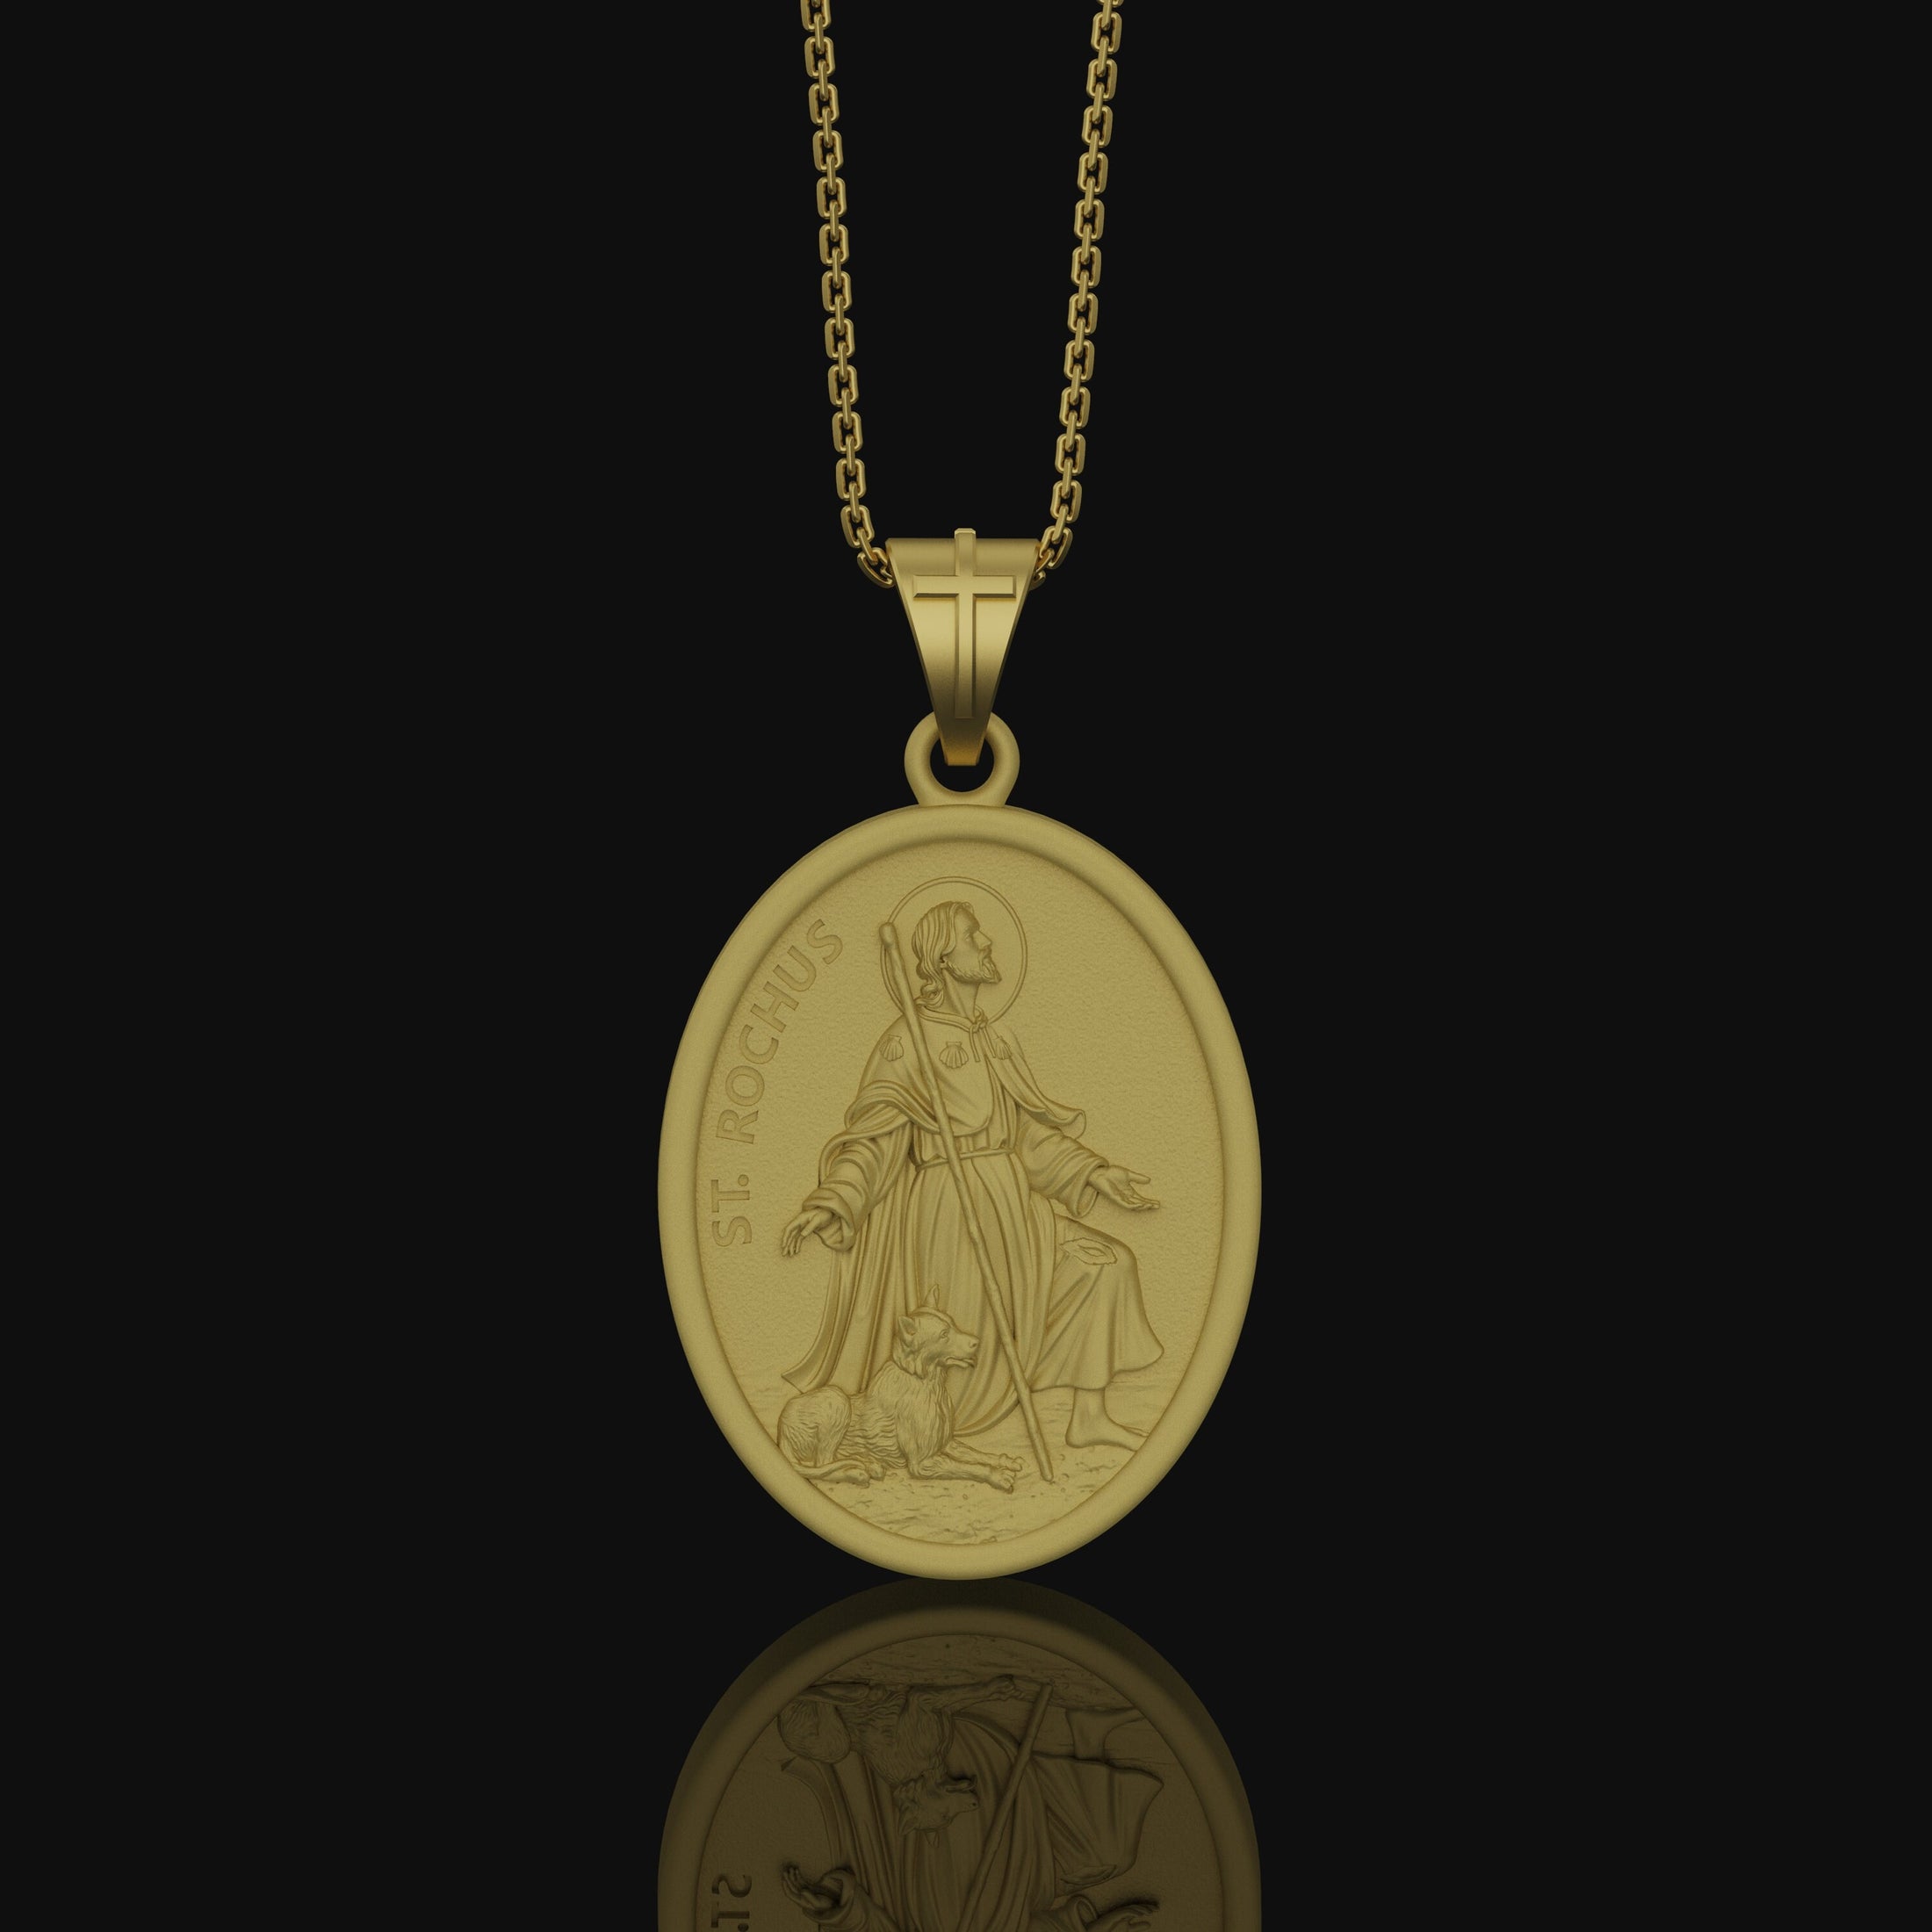 Saint Rochus Necklace, Dog Protection, Christmas Gift, Personalized Gift, Silver Medallion, Christian Jewelry, Vintage Religious Necklace Gold Matte